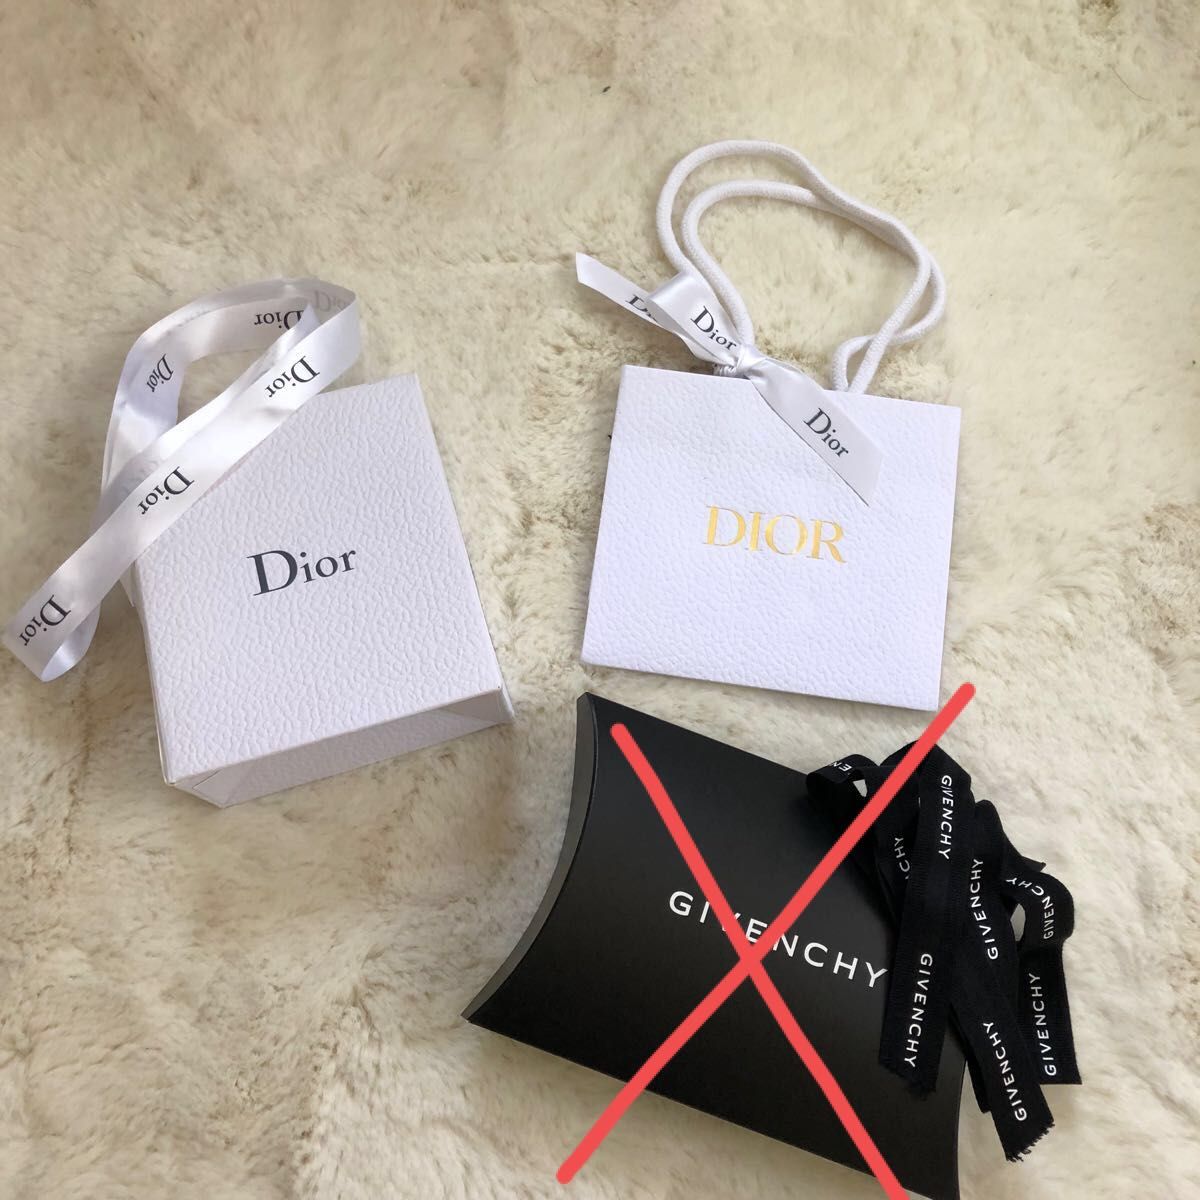 Dior GIVENCHY ギフトセット ショップ袋